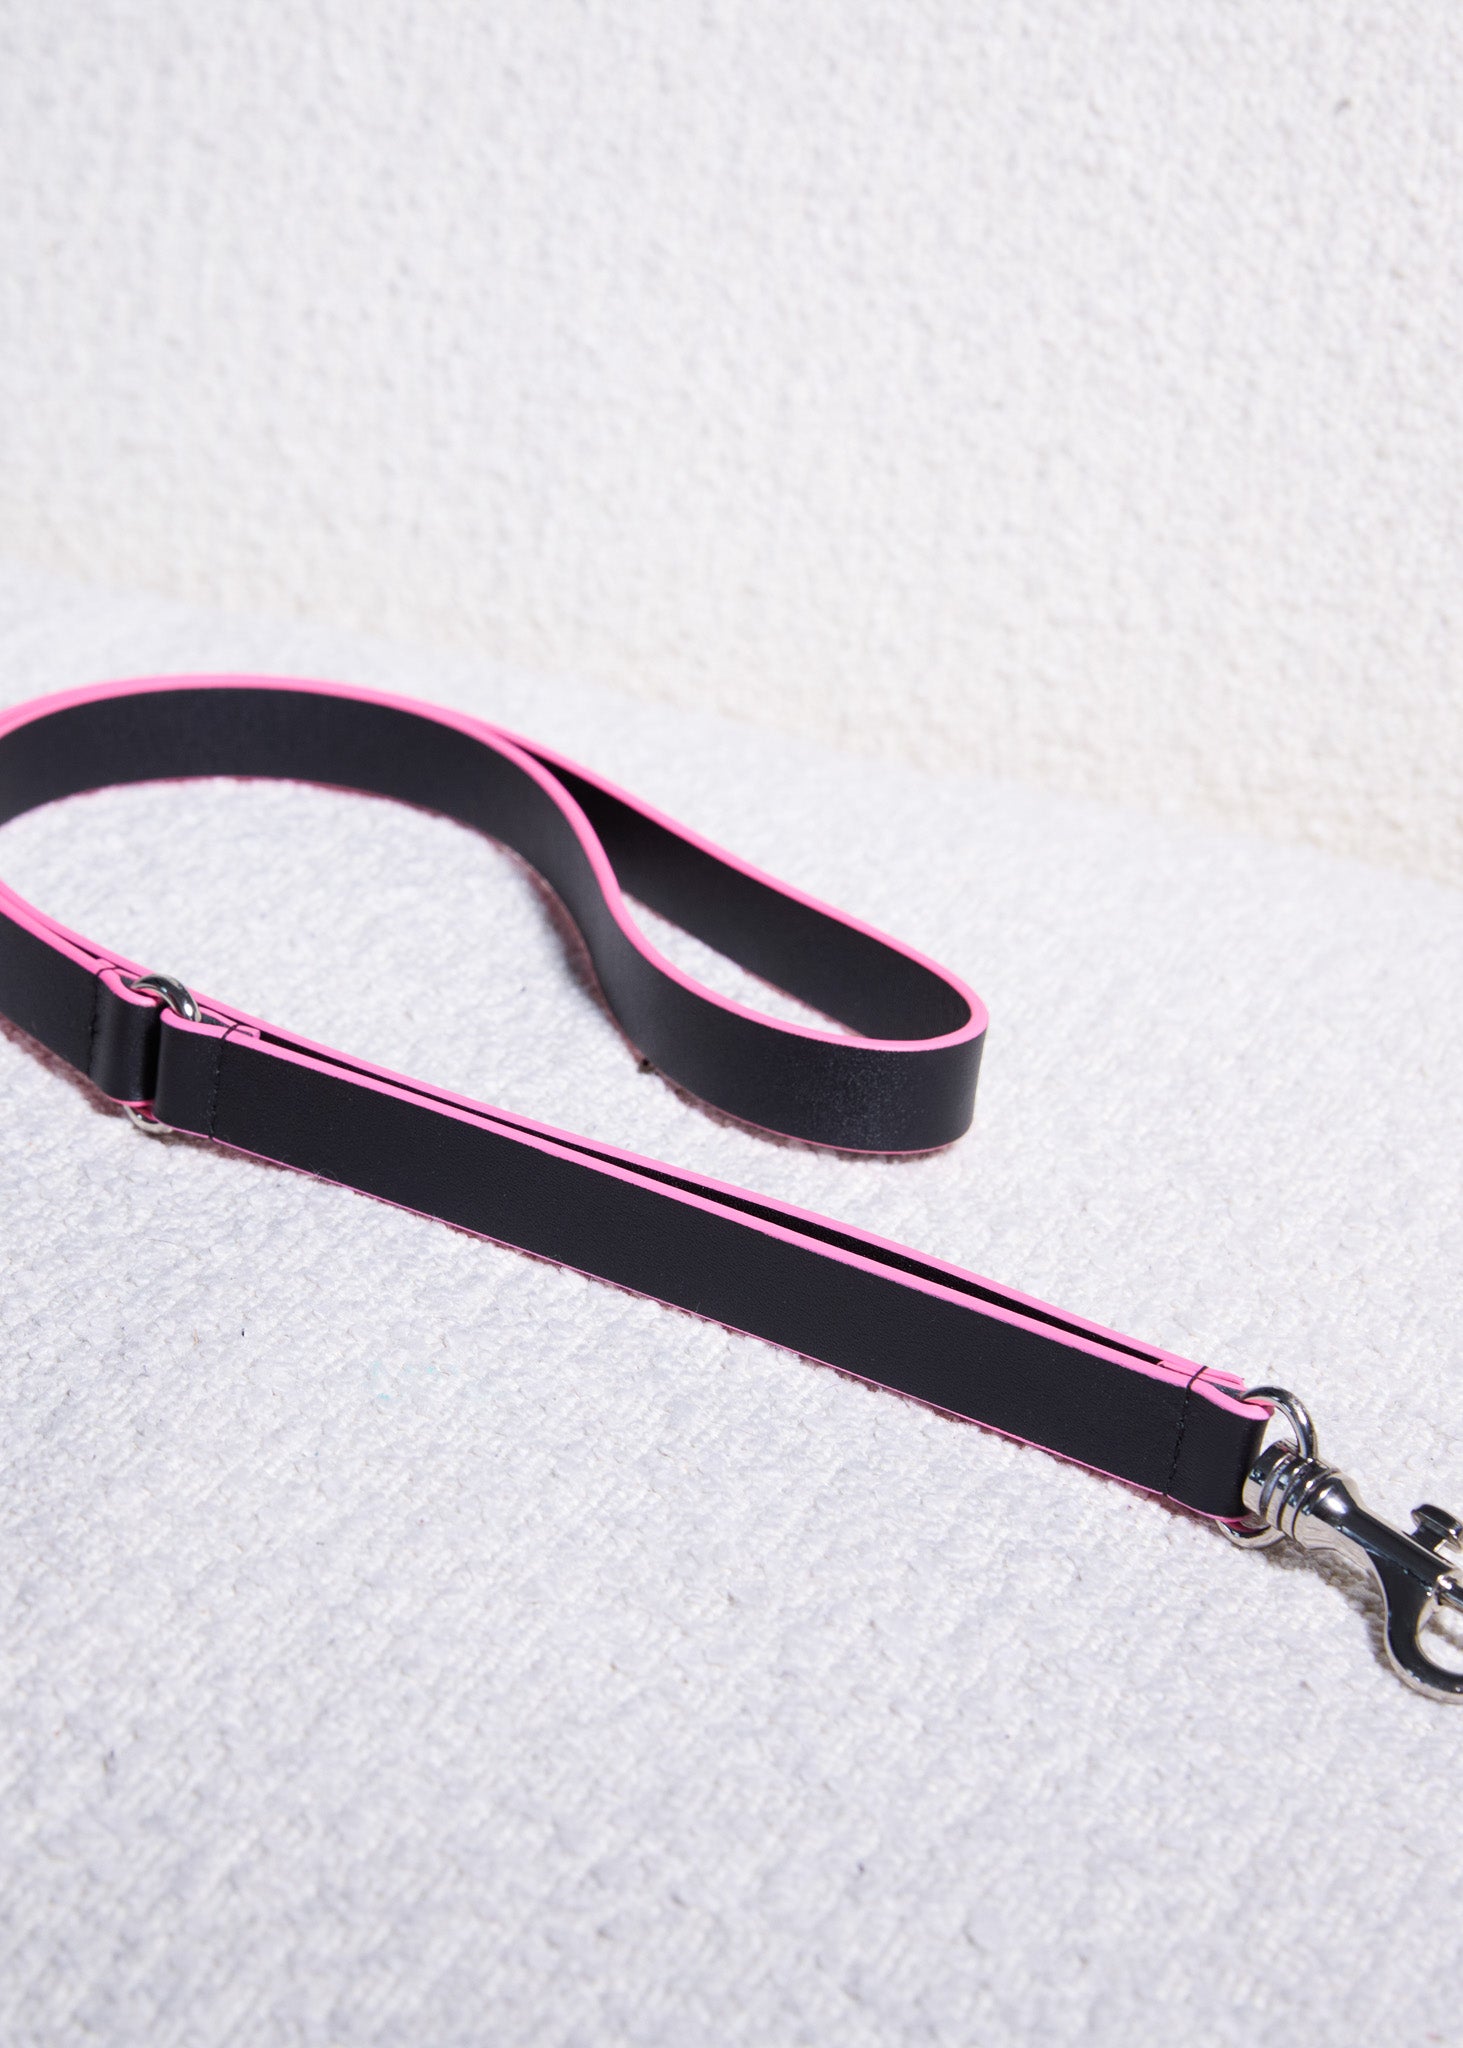 HANDS-FREE LEATHER STRAP - BLACK/PINK